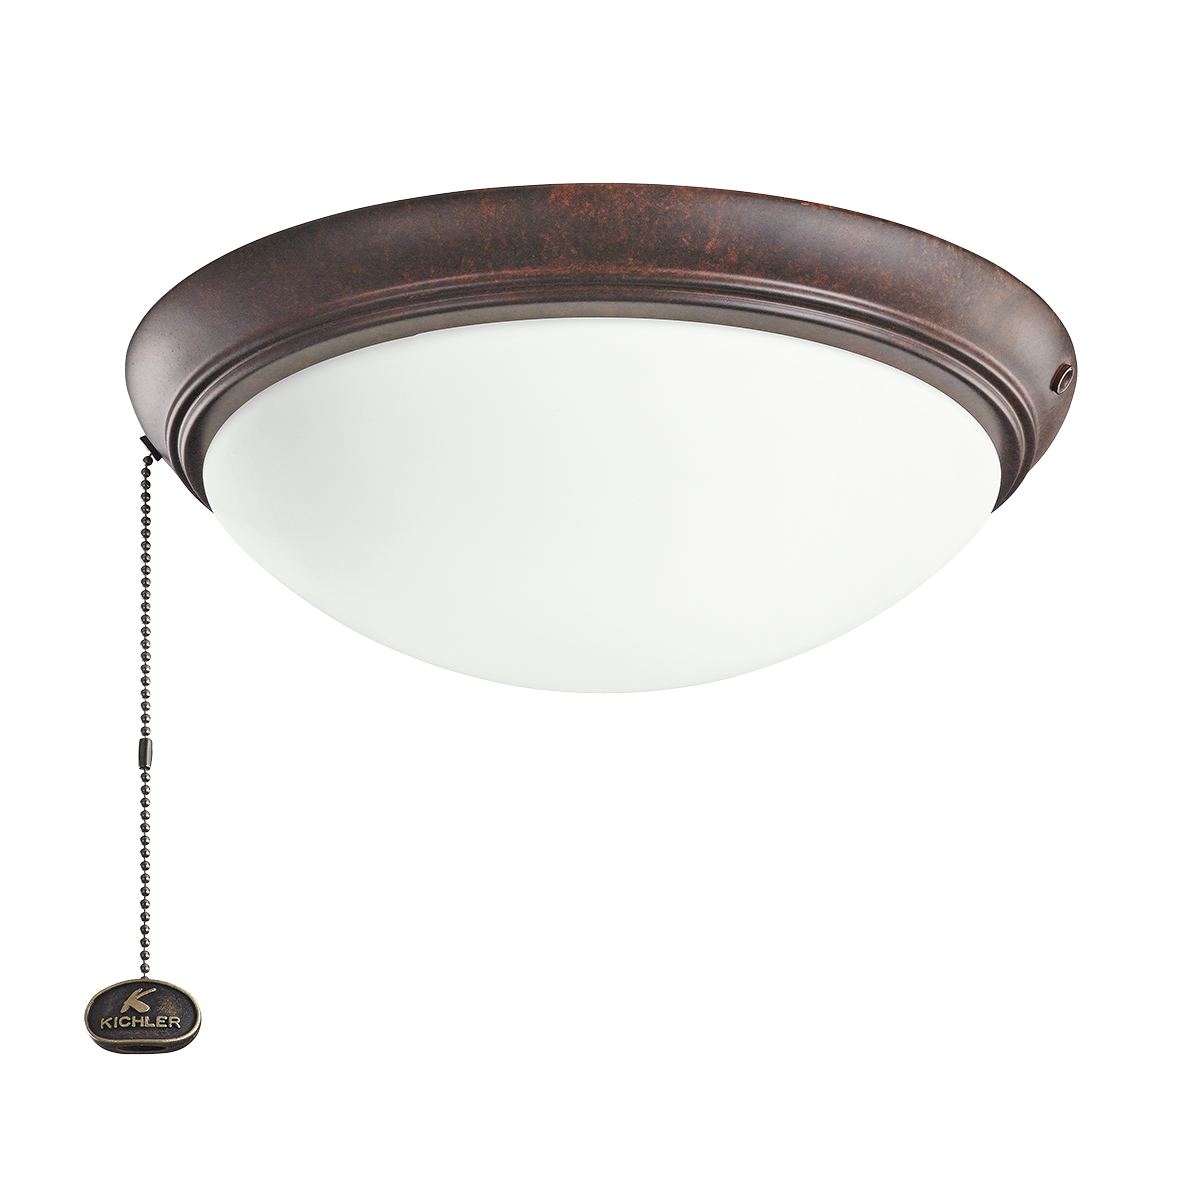 Low profile Etched Cased Opal LED Ceiling Fan fixture in Tannery Bronze